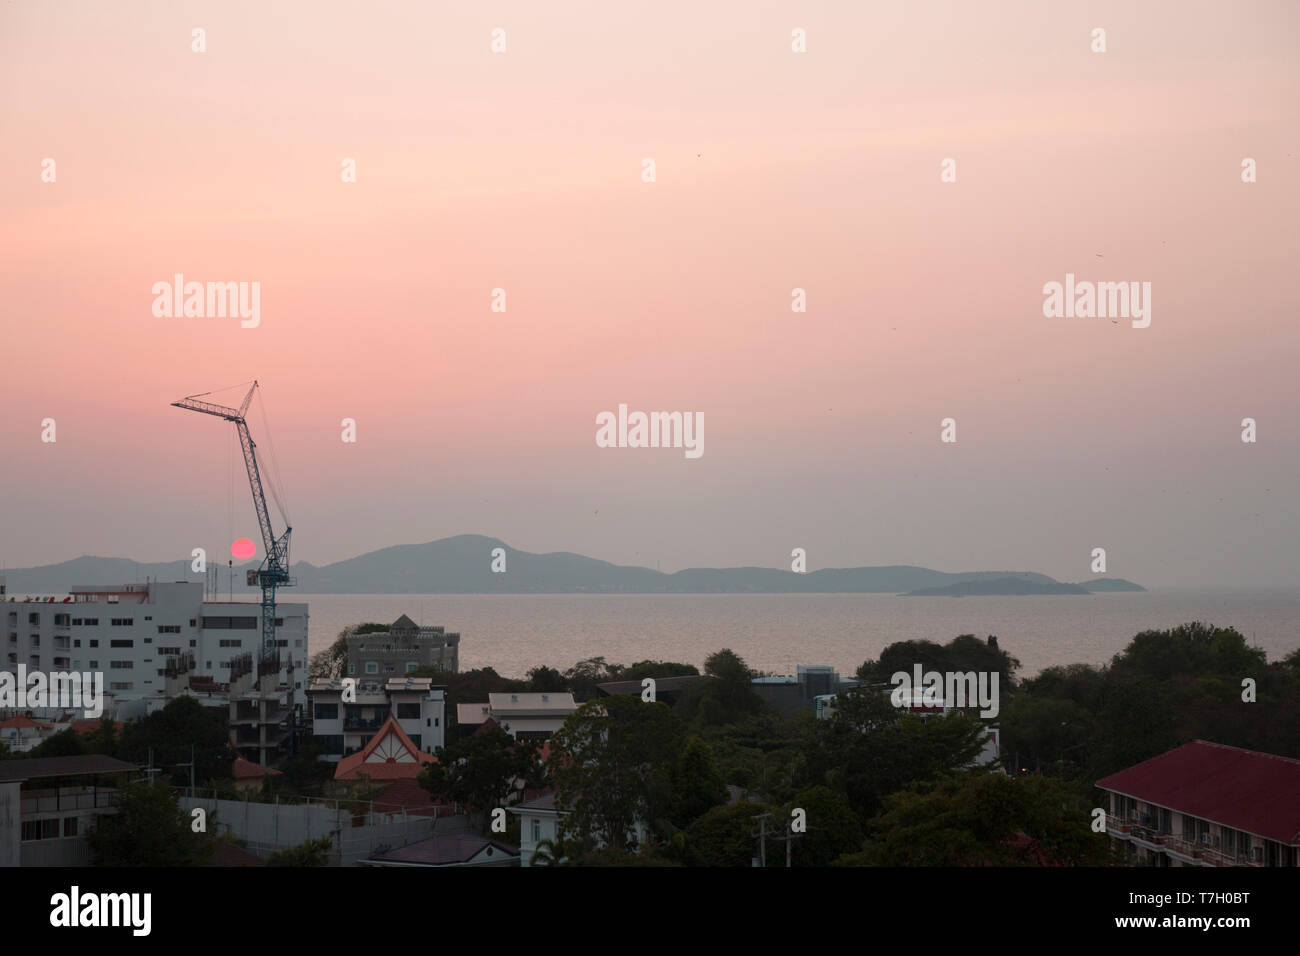 Building on the sea cost. Construction equipment at pink sunset. Real estate on the beach. Stock Photo